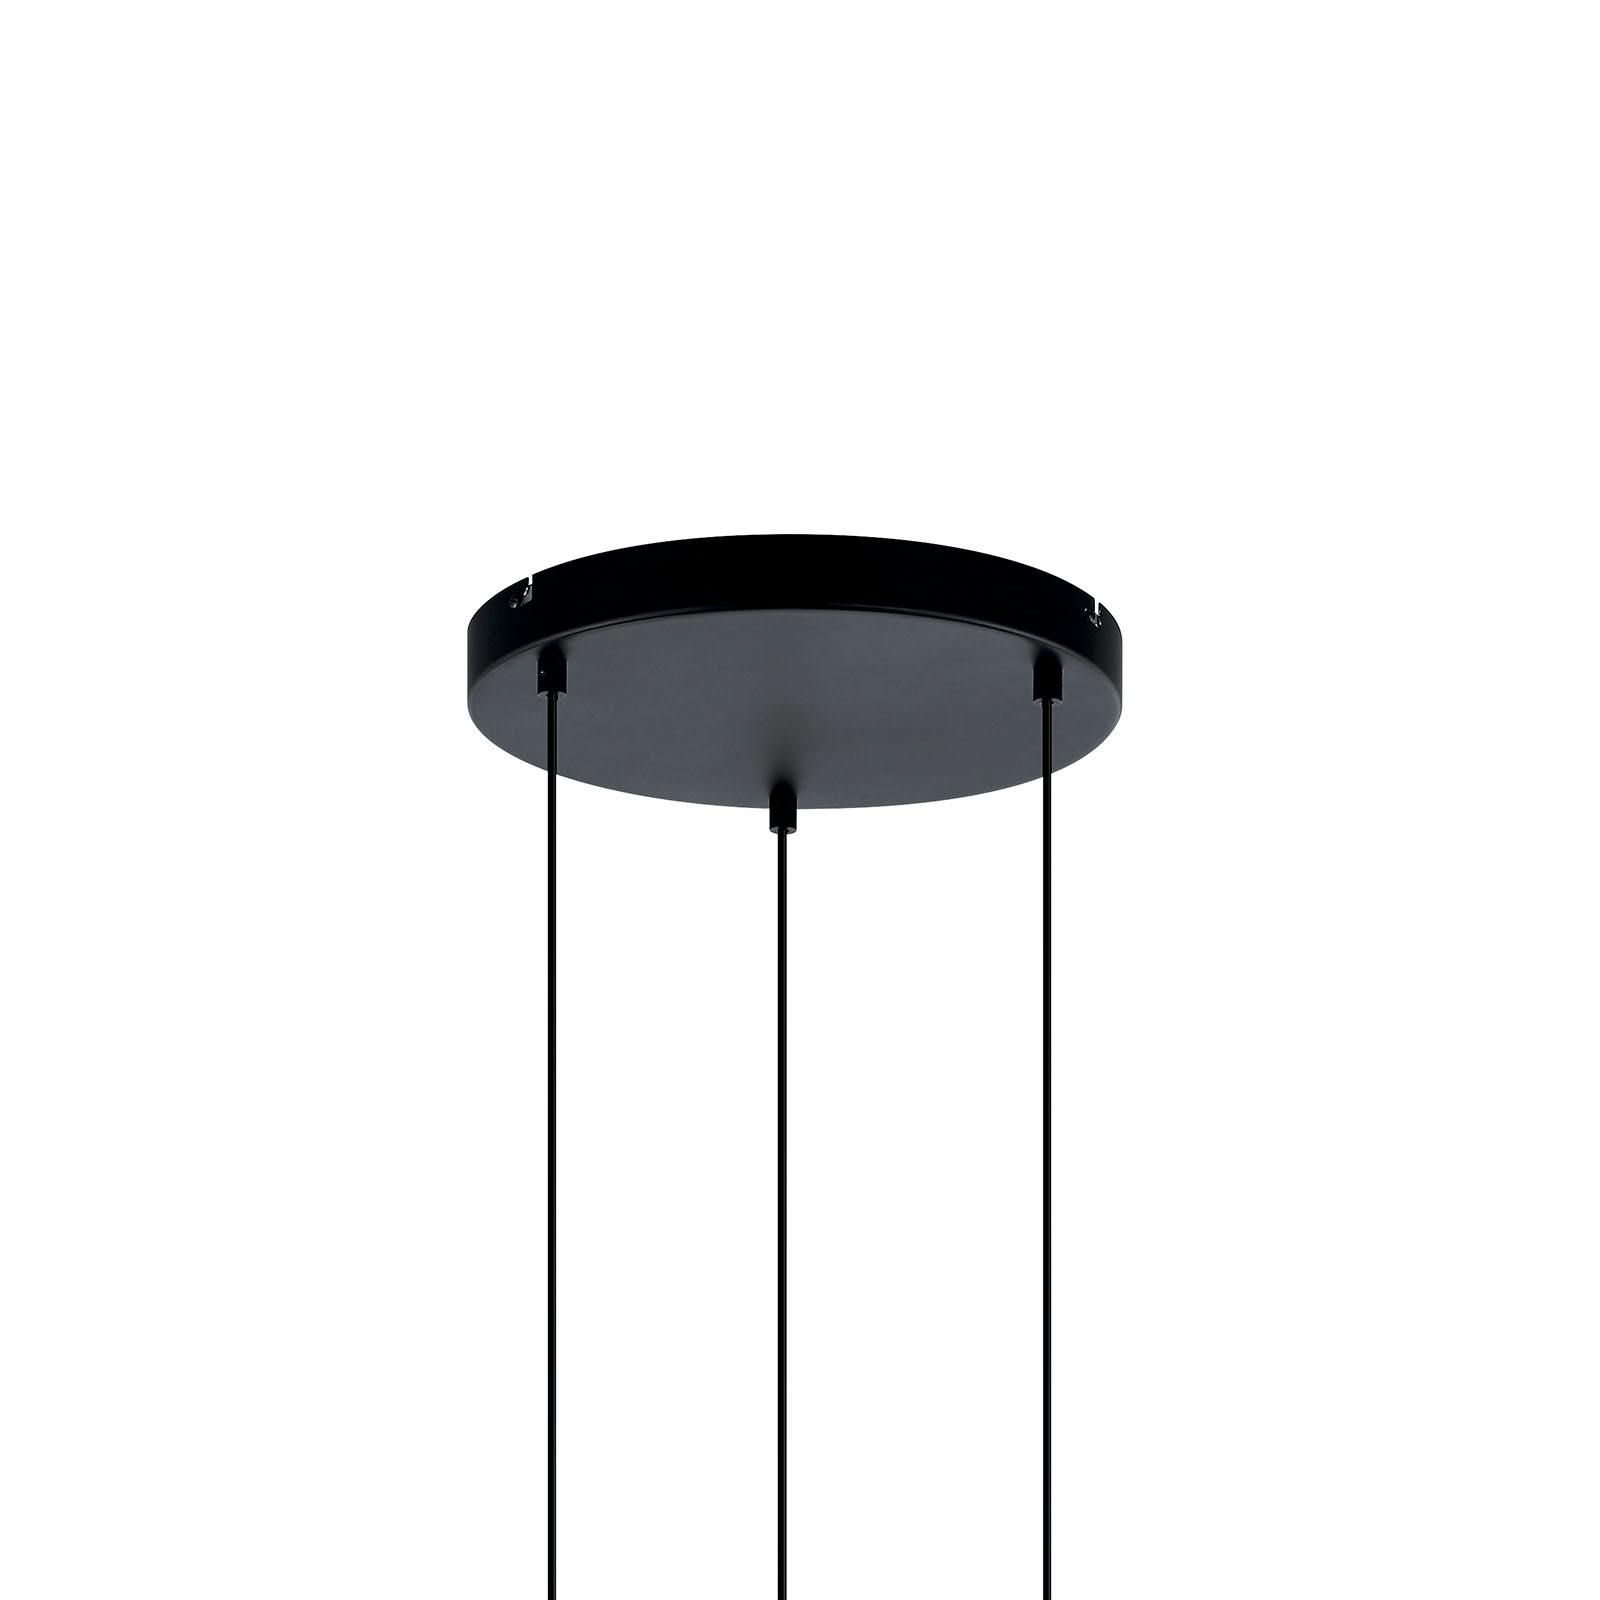 Canopy image of the Kordan Pendant 84114 on a white background